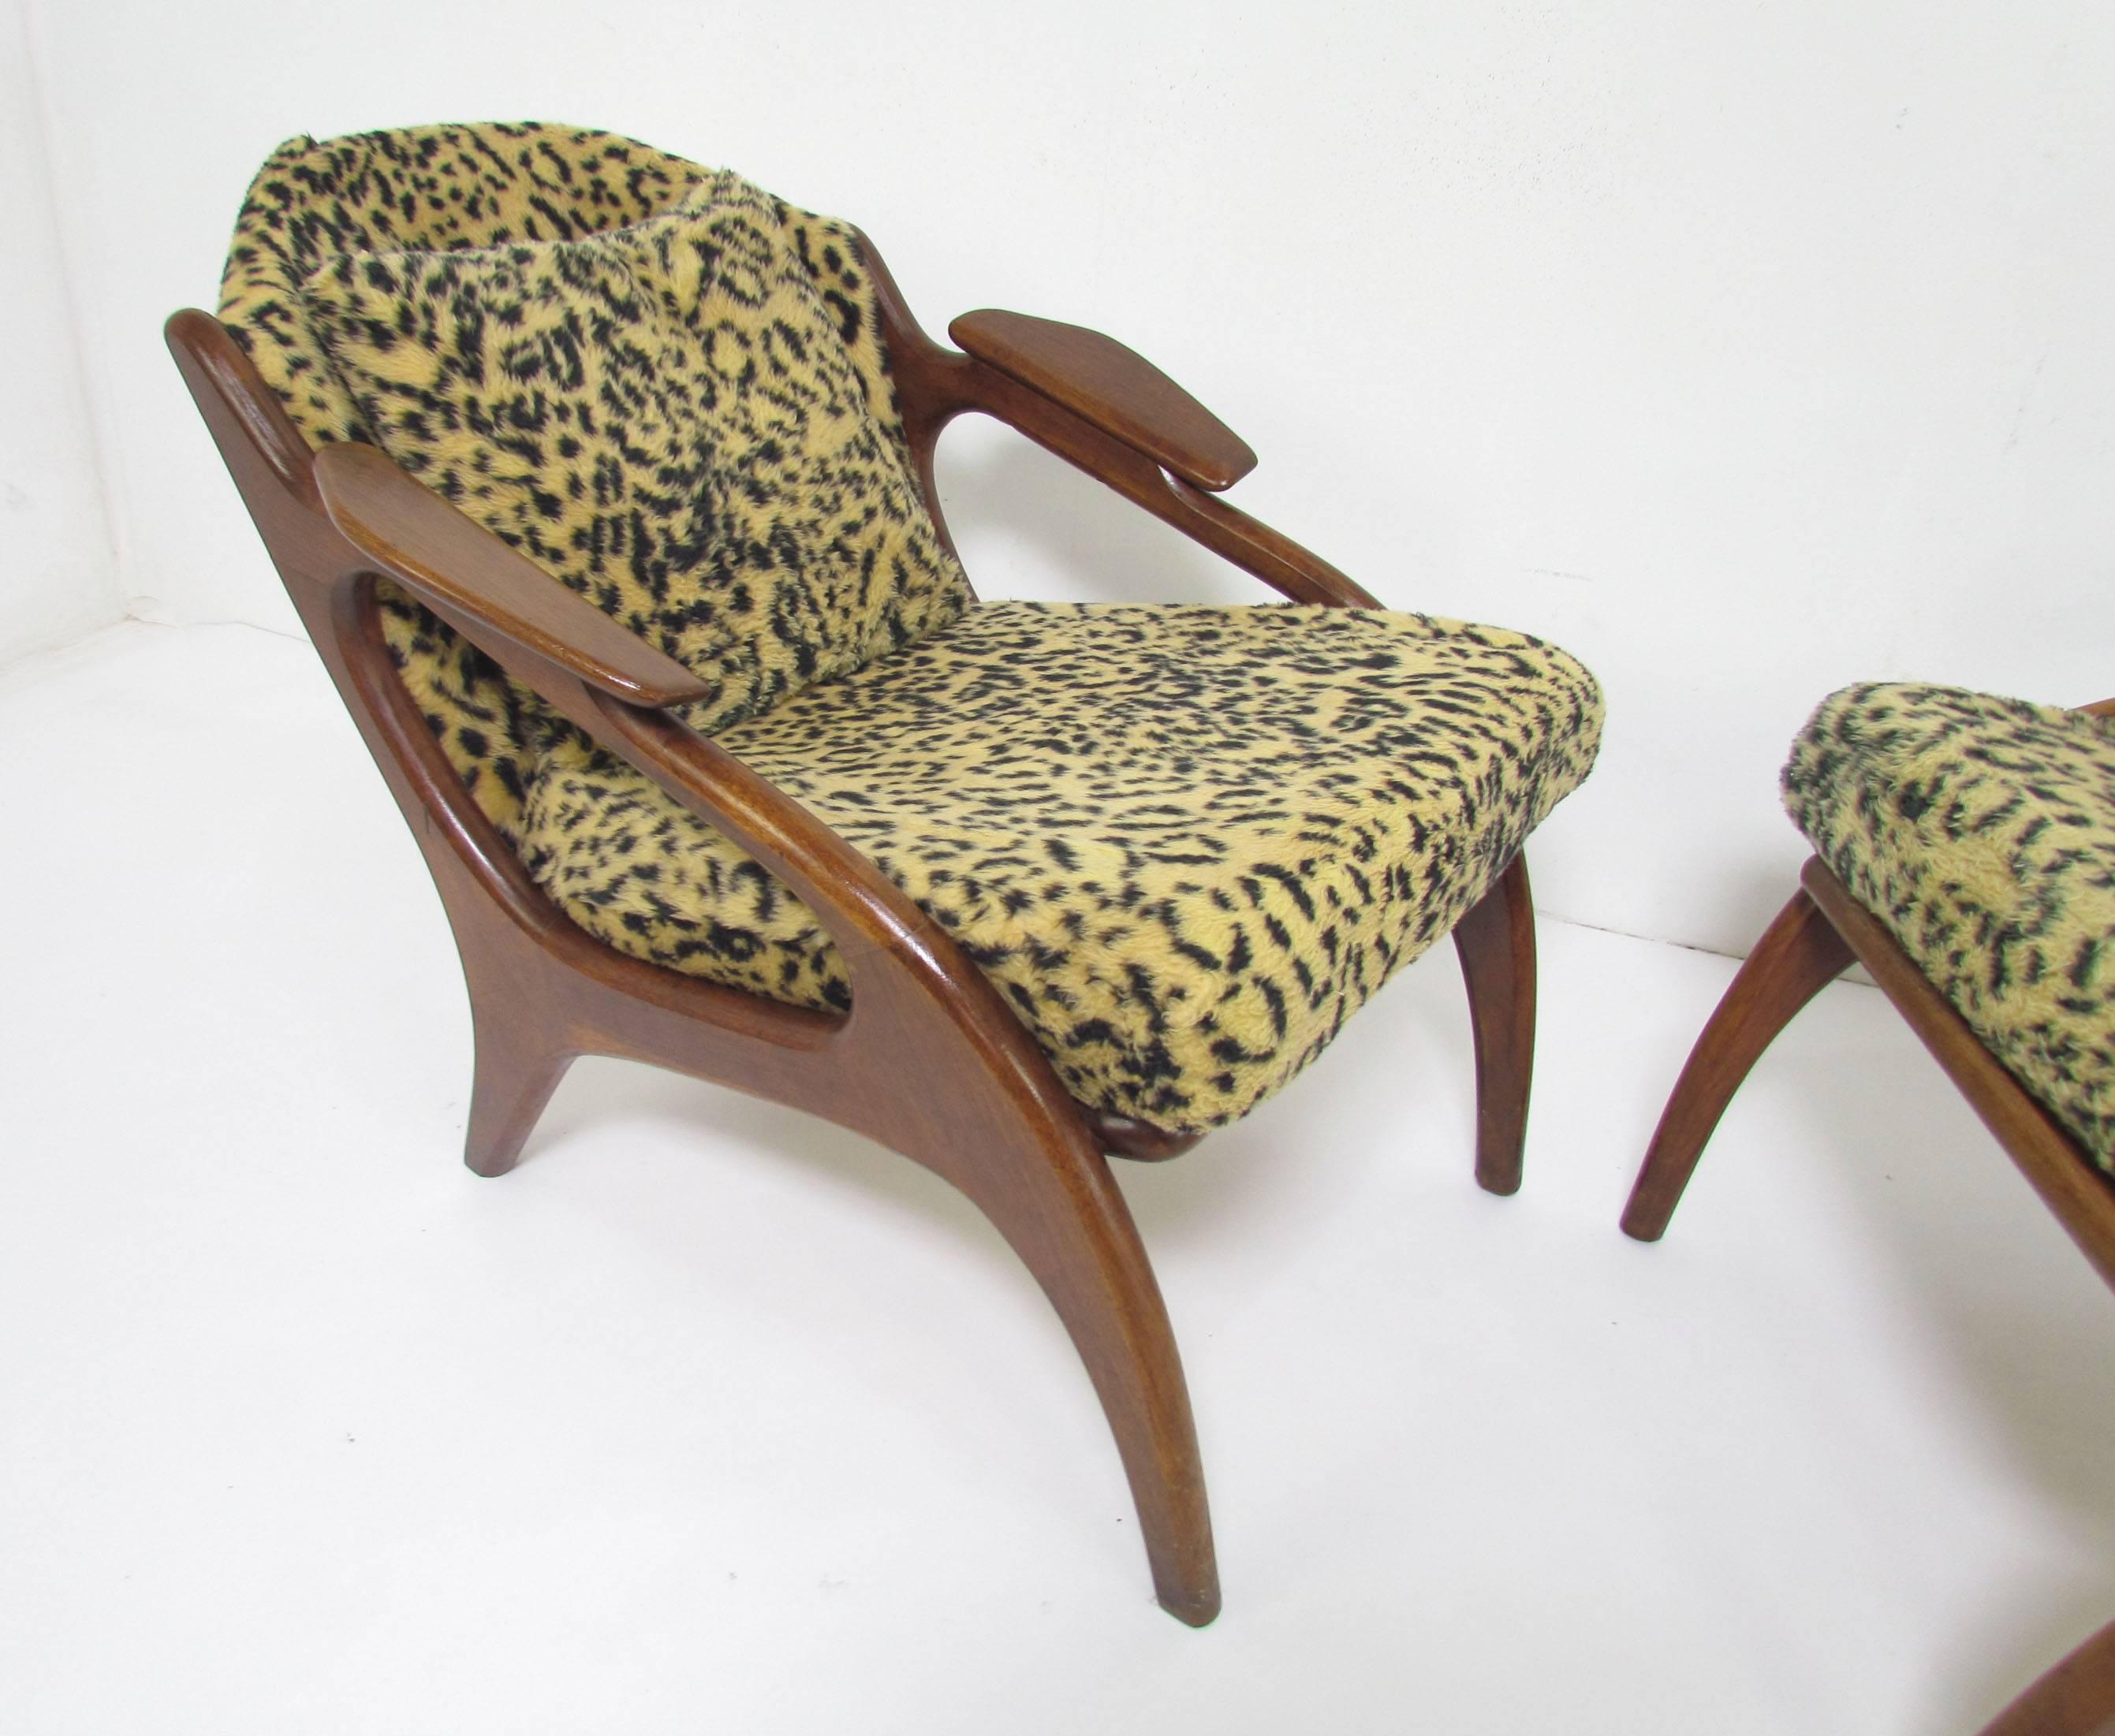 Pair of sculptural lounge chairs designed by Adrian Pearsall for his company Craft Associates, with an obvious nod to the influence of Vladimir Kagan.